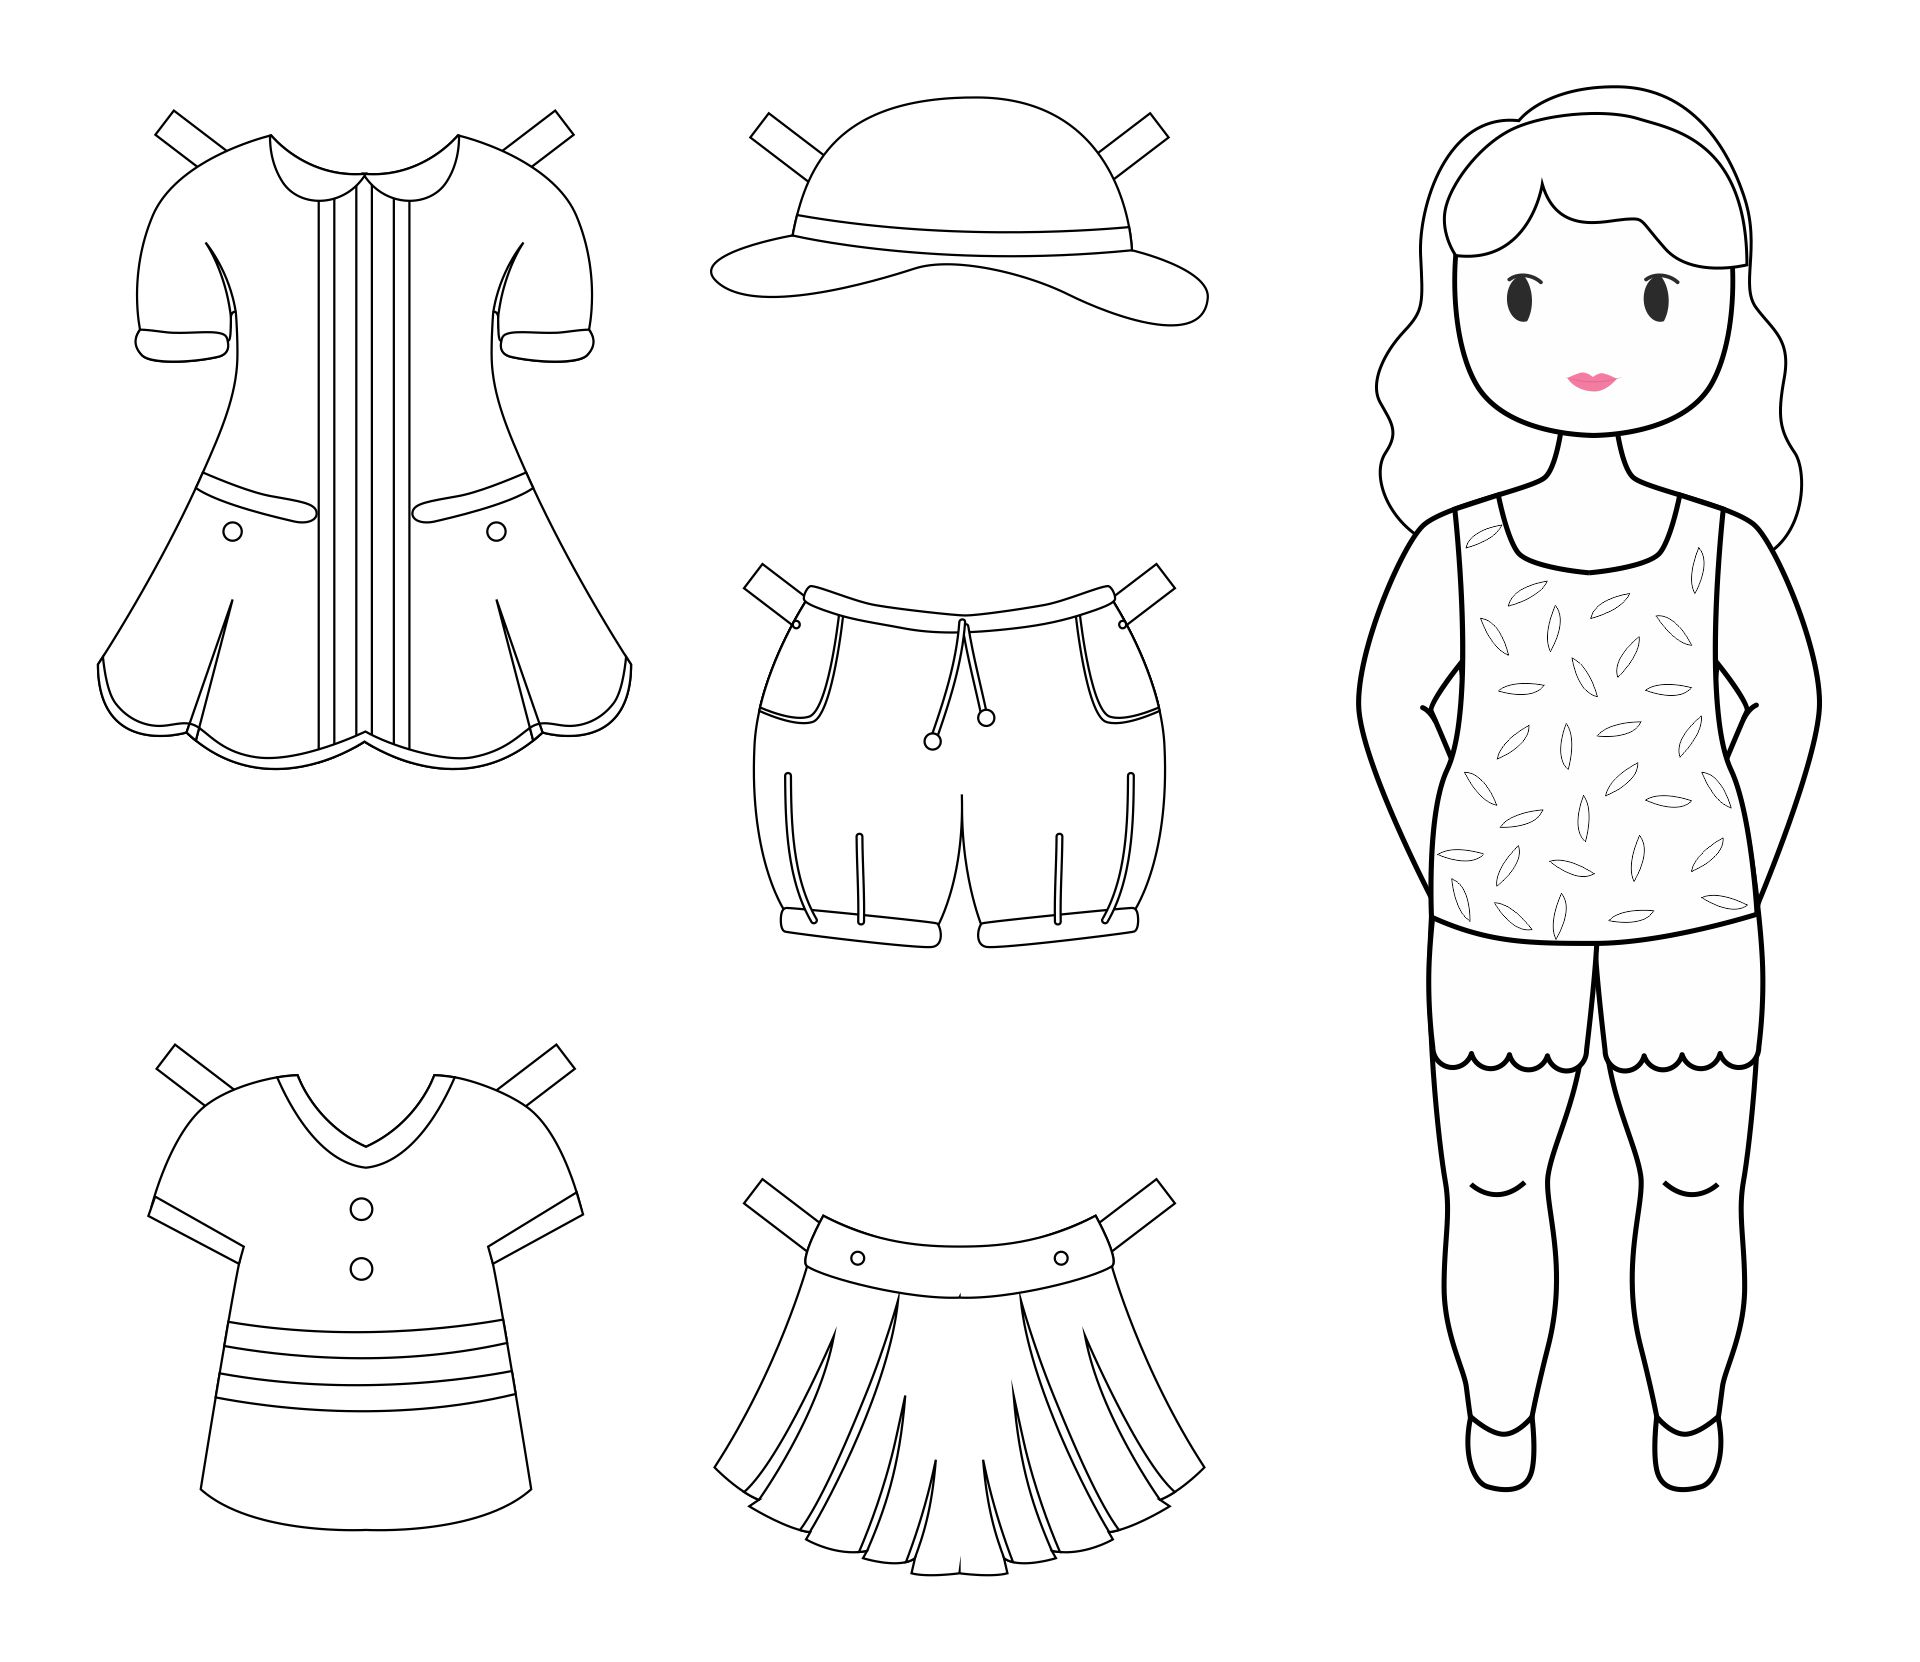 ice-queen-printable-paper-doll-color-me-instant-download-dress-up